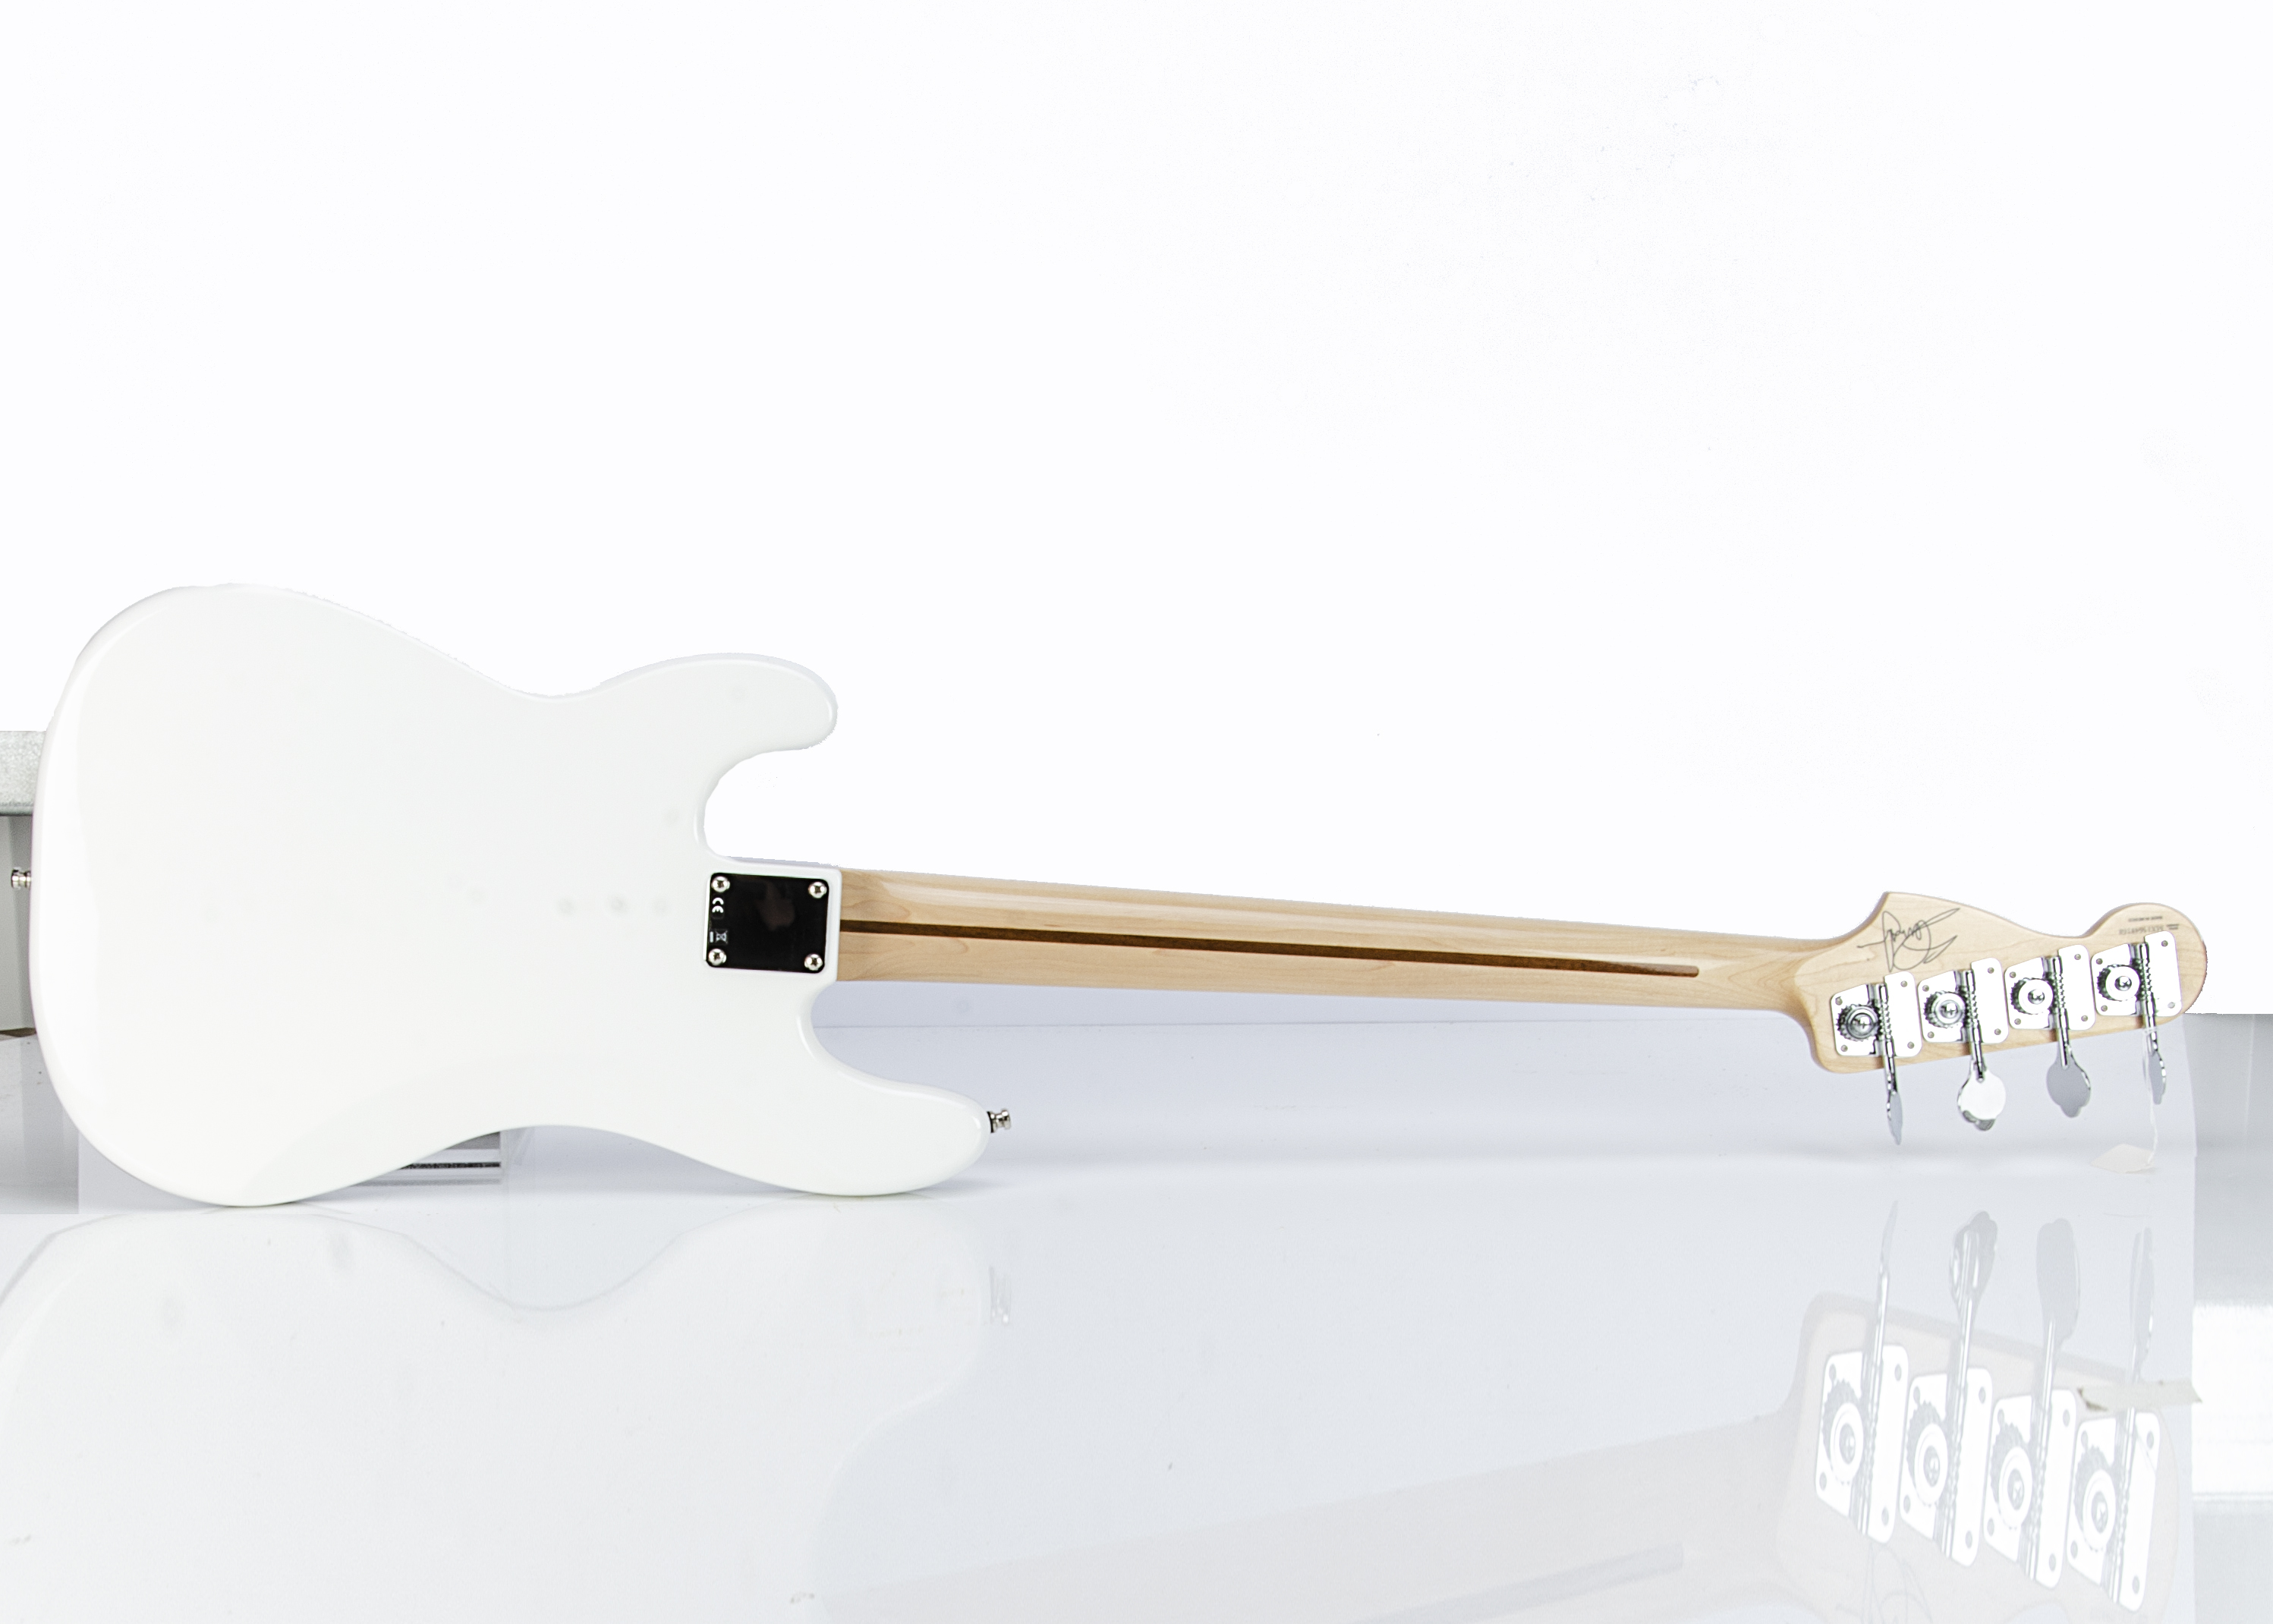 Steve Harris Fender Precision Bass, The Steve Harris Precision Bass was designed in collaboration - Image 4 of 7